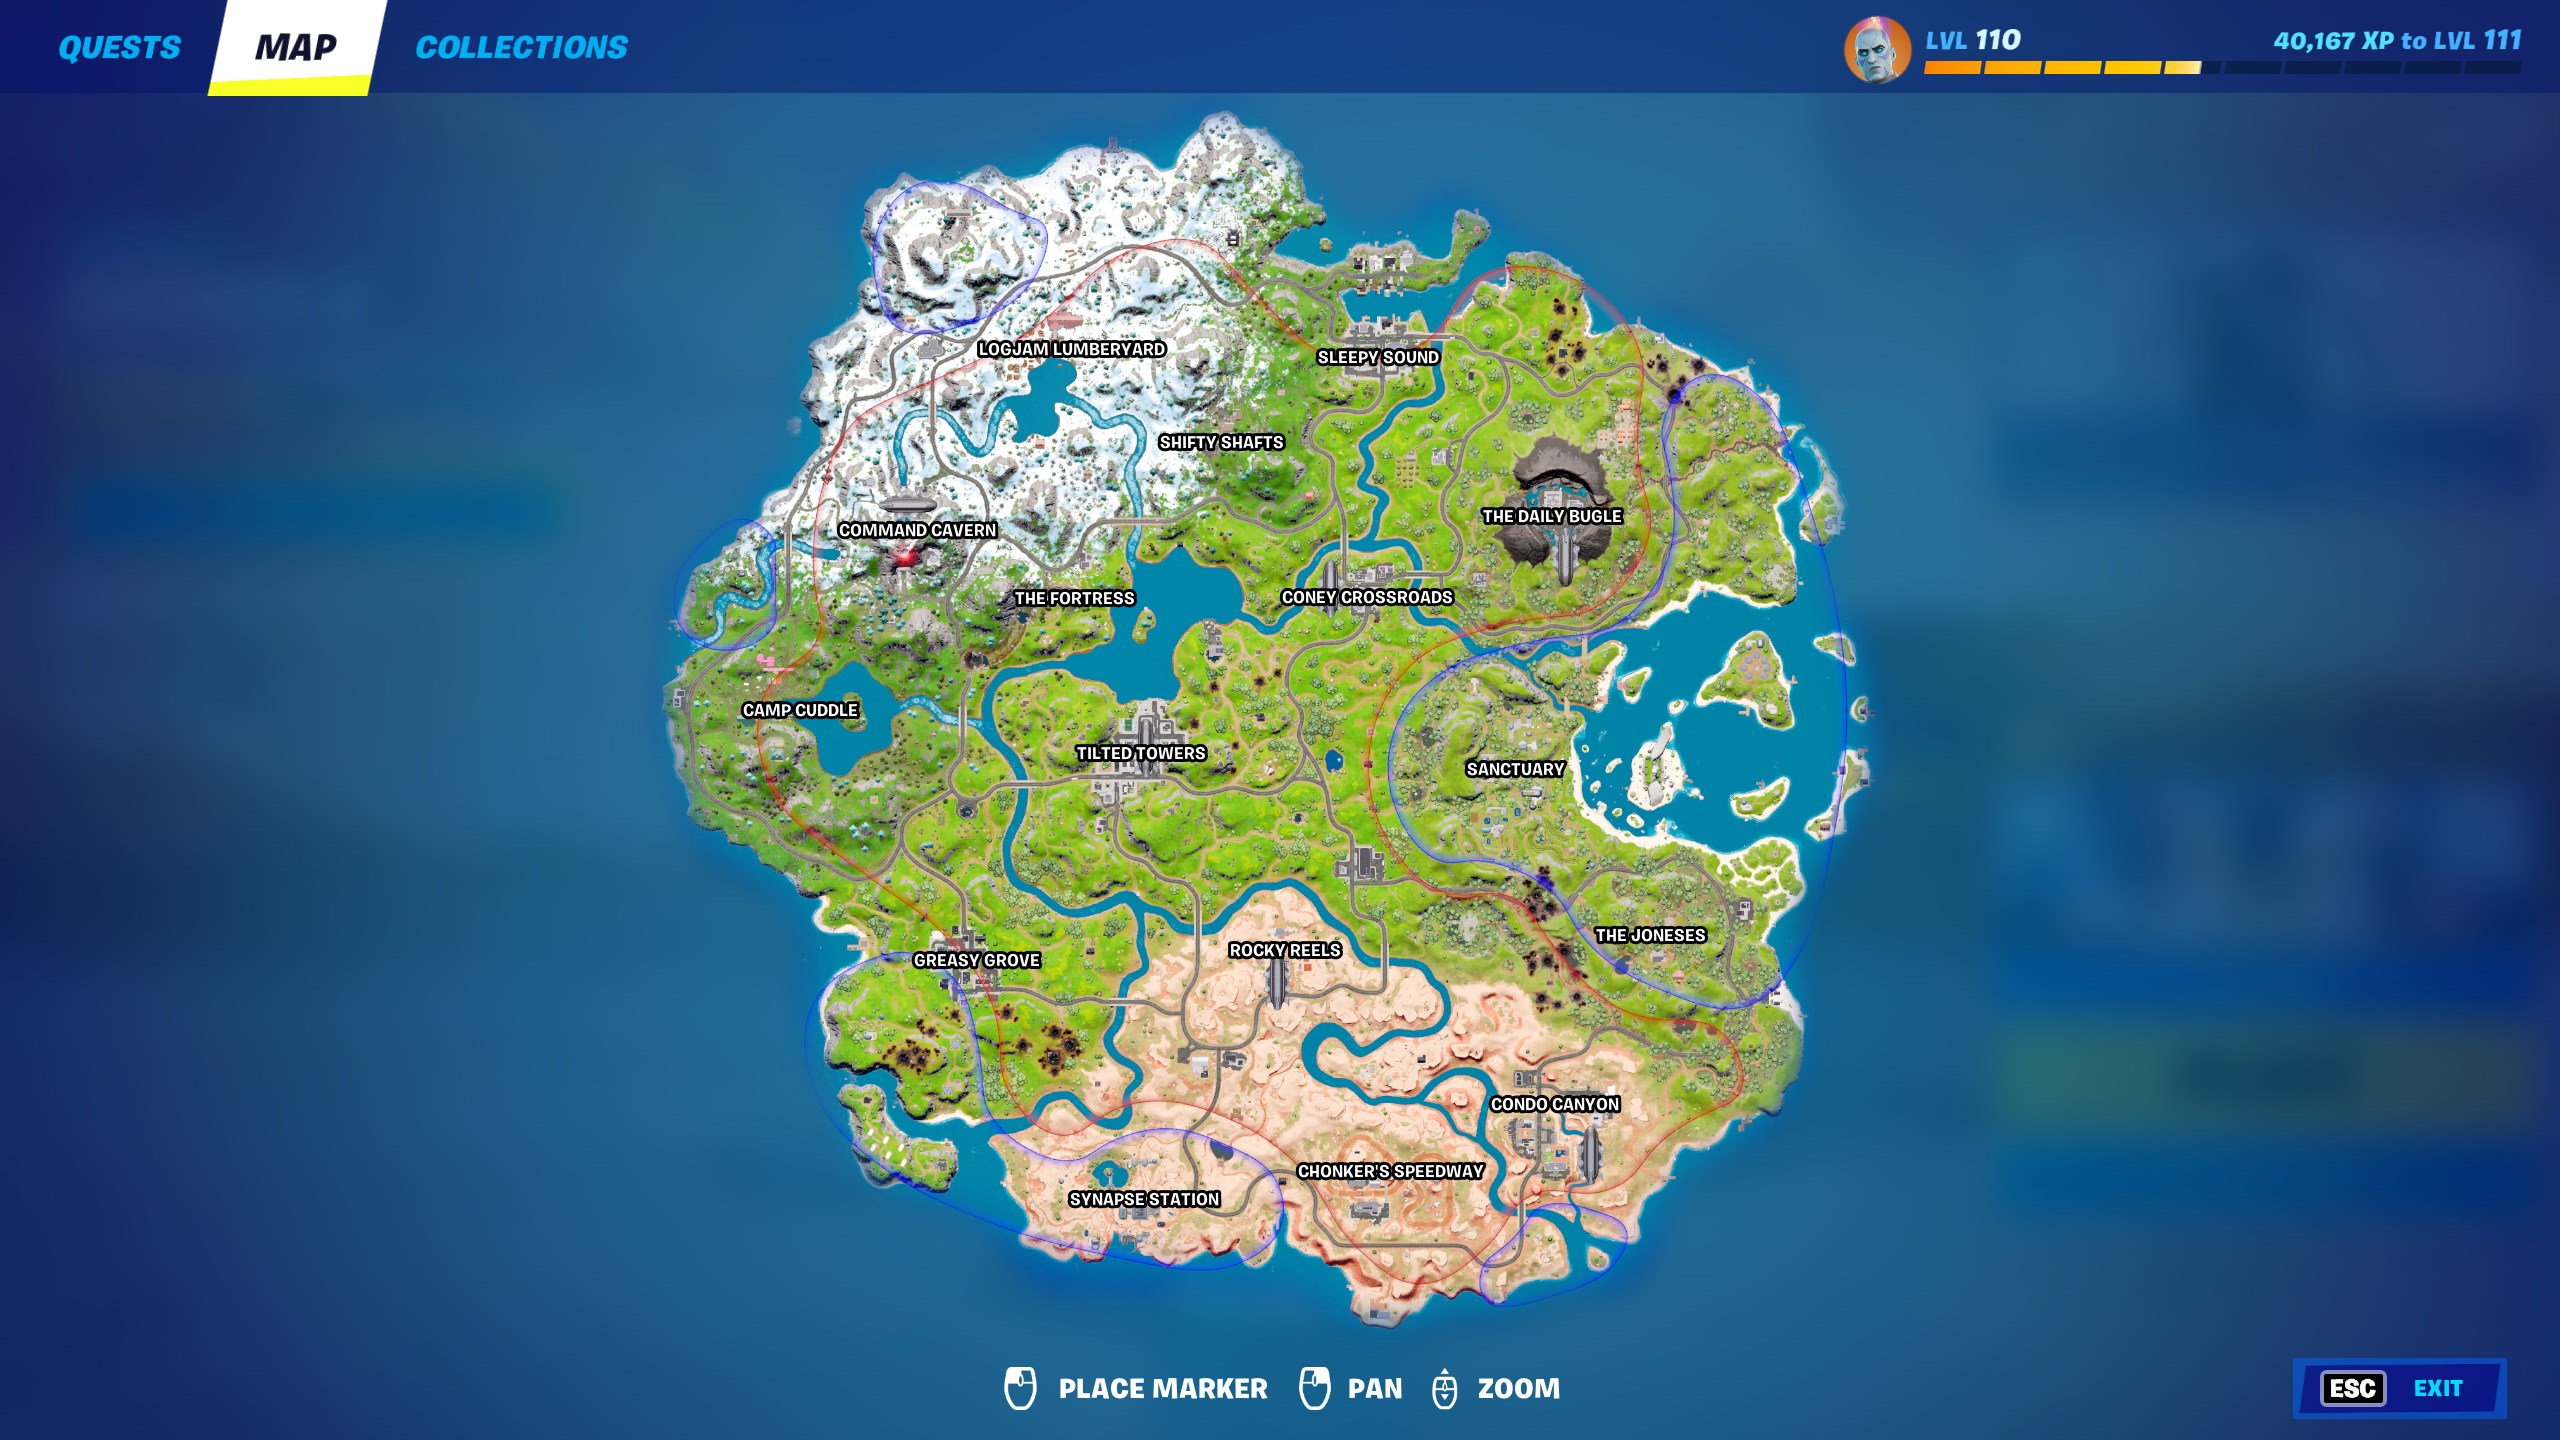 Fortnite Map Locations New Areas And Changes For Season 2 Techradar